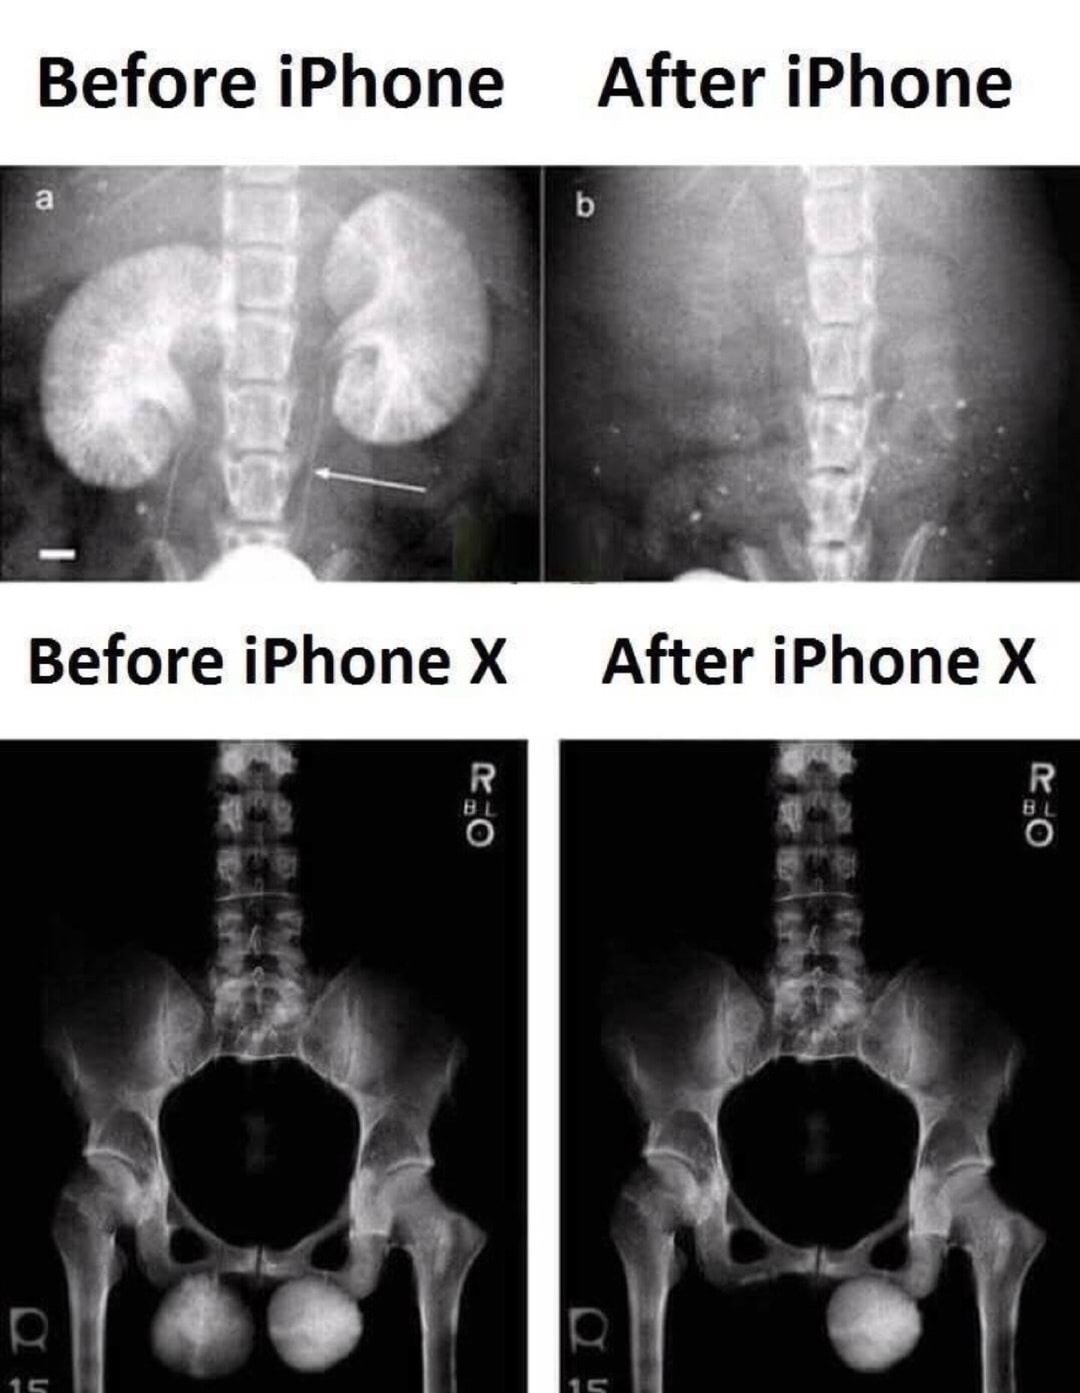 iphone x 9gag - Before iPhone After iPhone . Before iPhone X After iPhone X